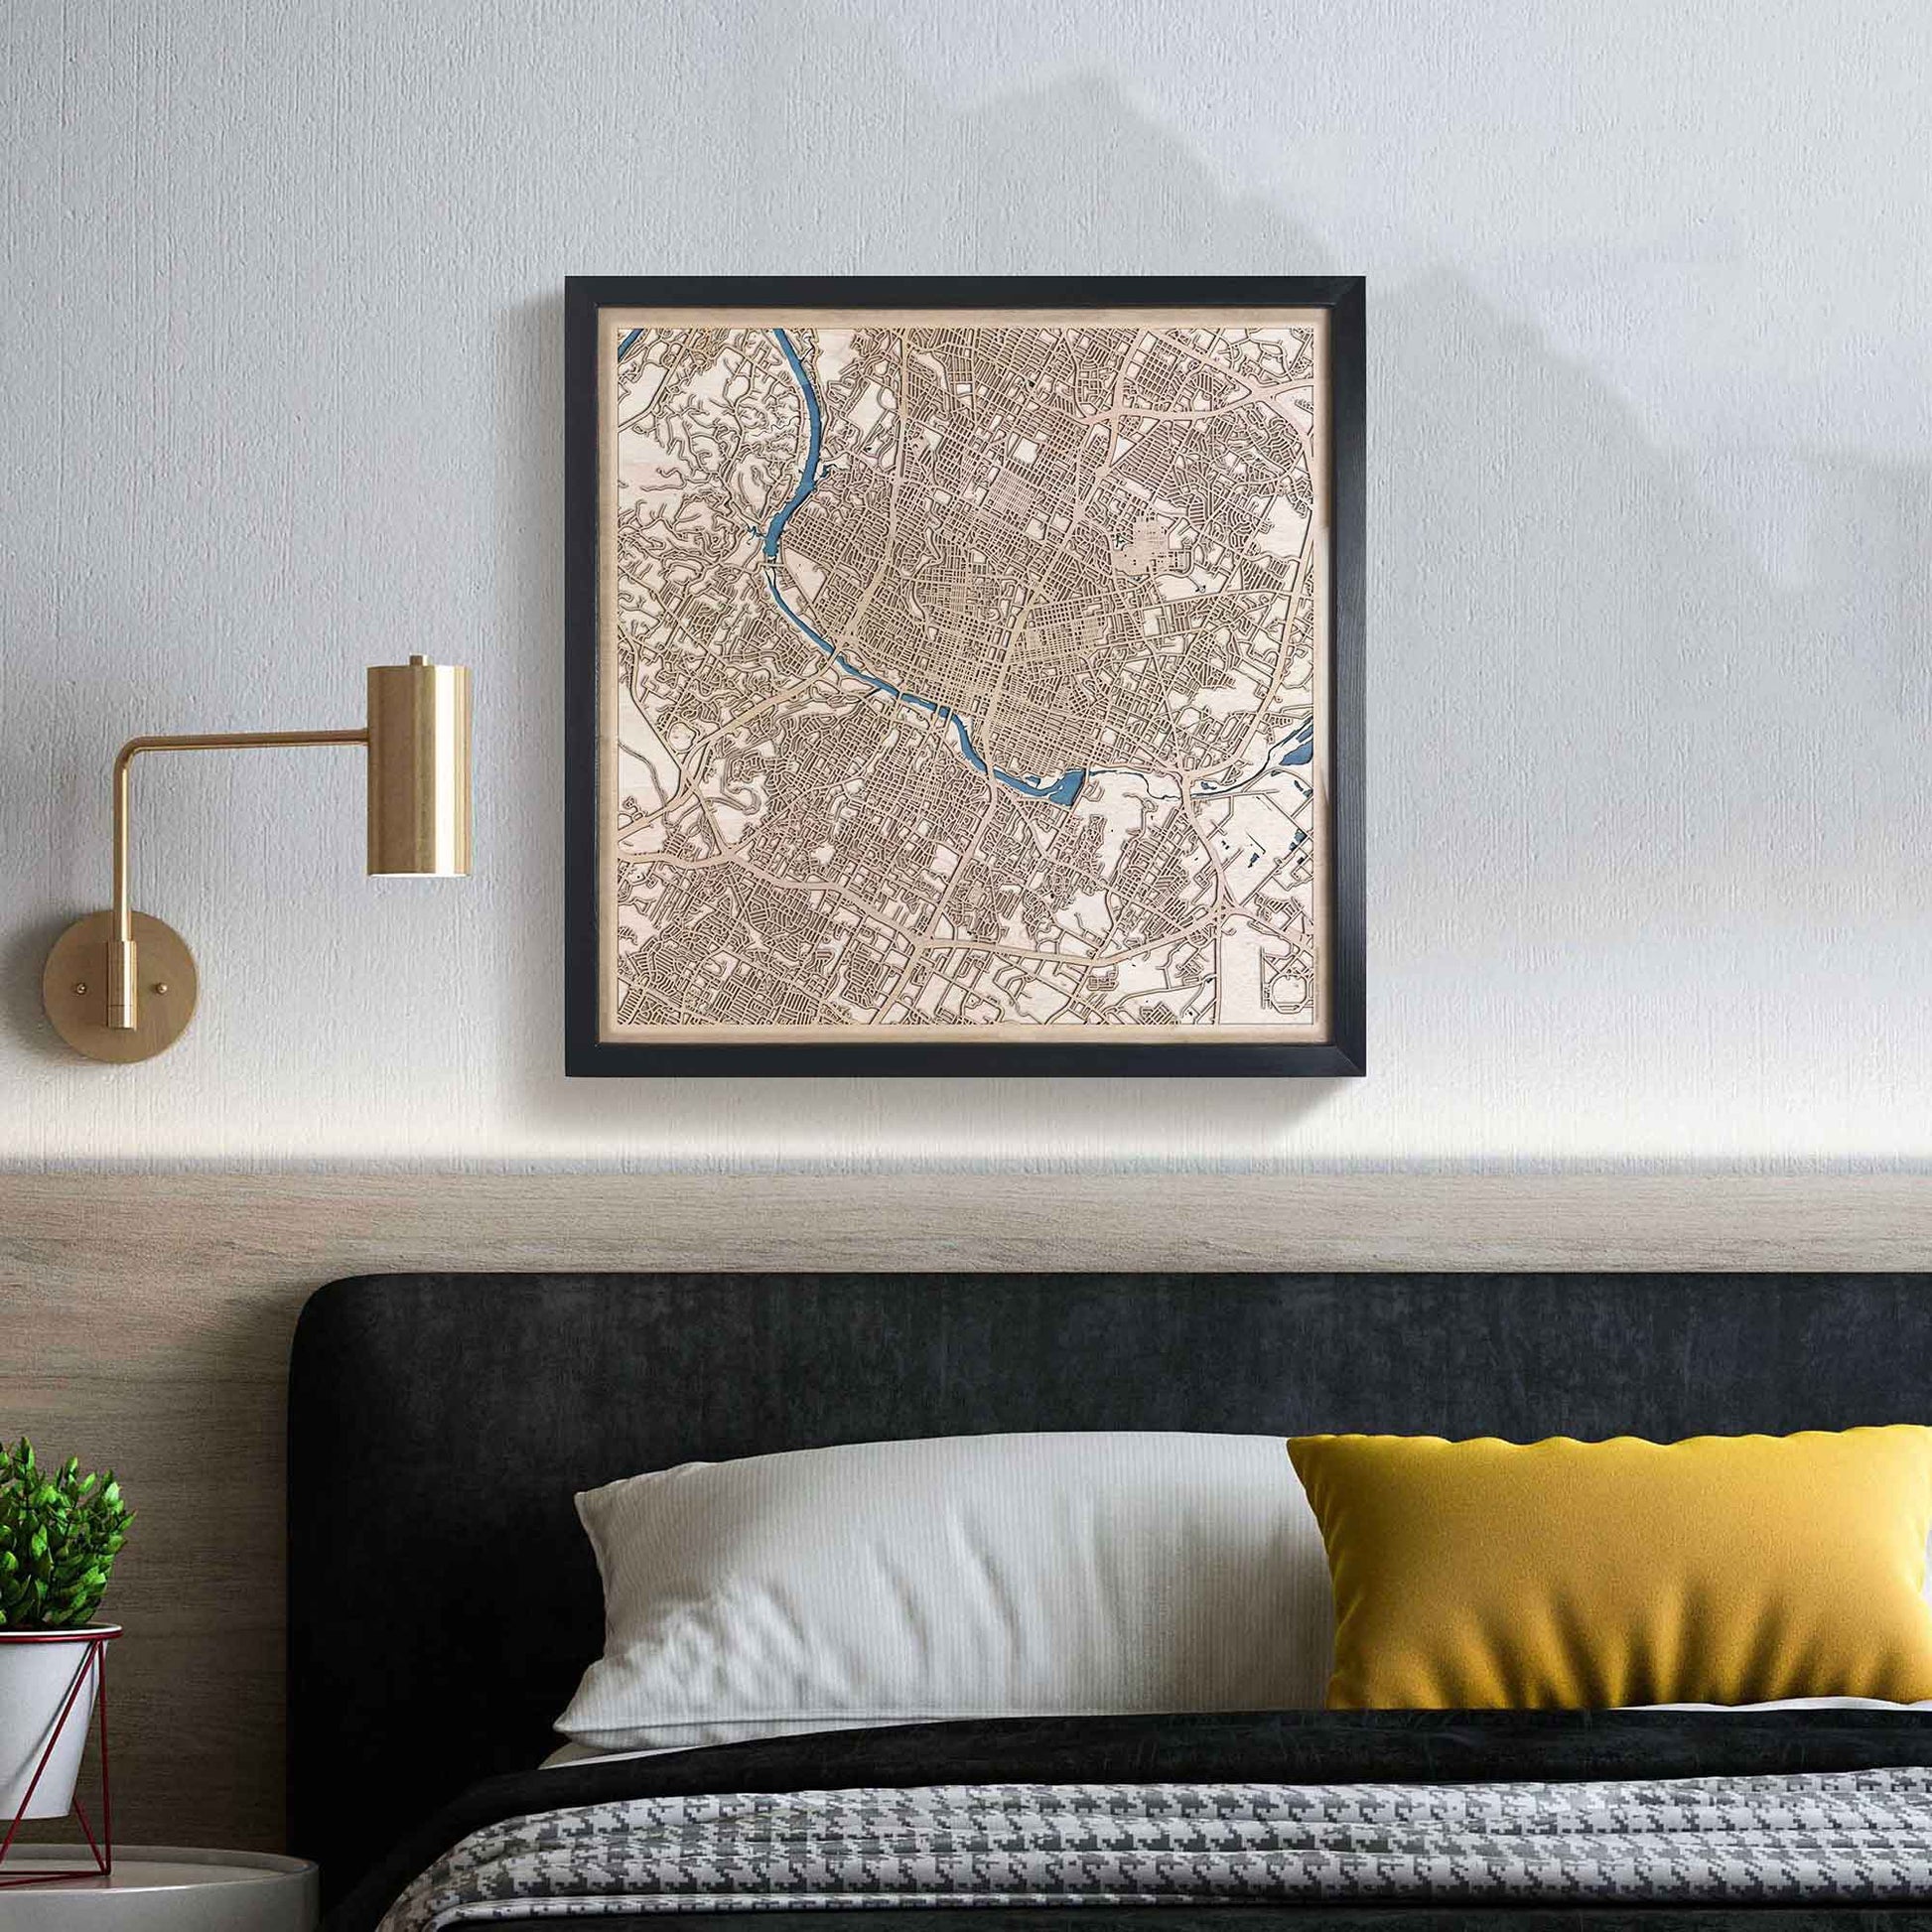 Austin Wooden Map by CityWood - Custom Wood Map Art - Unique Laser Cut Engraved - Anniversary Gift